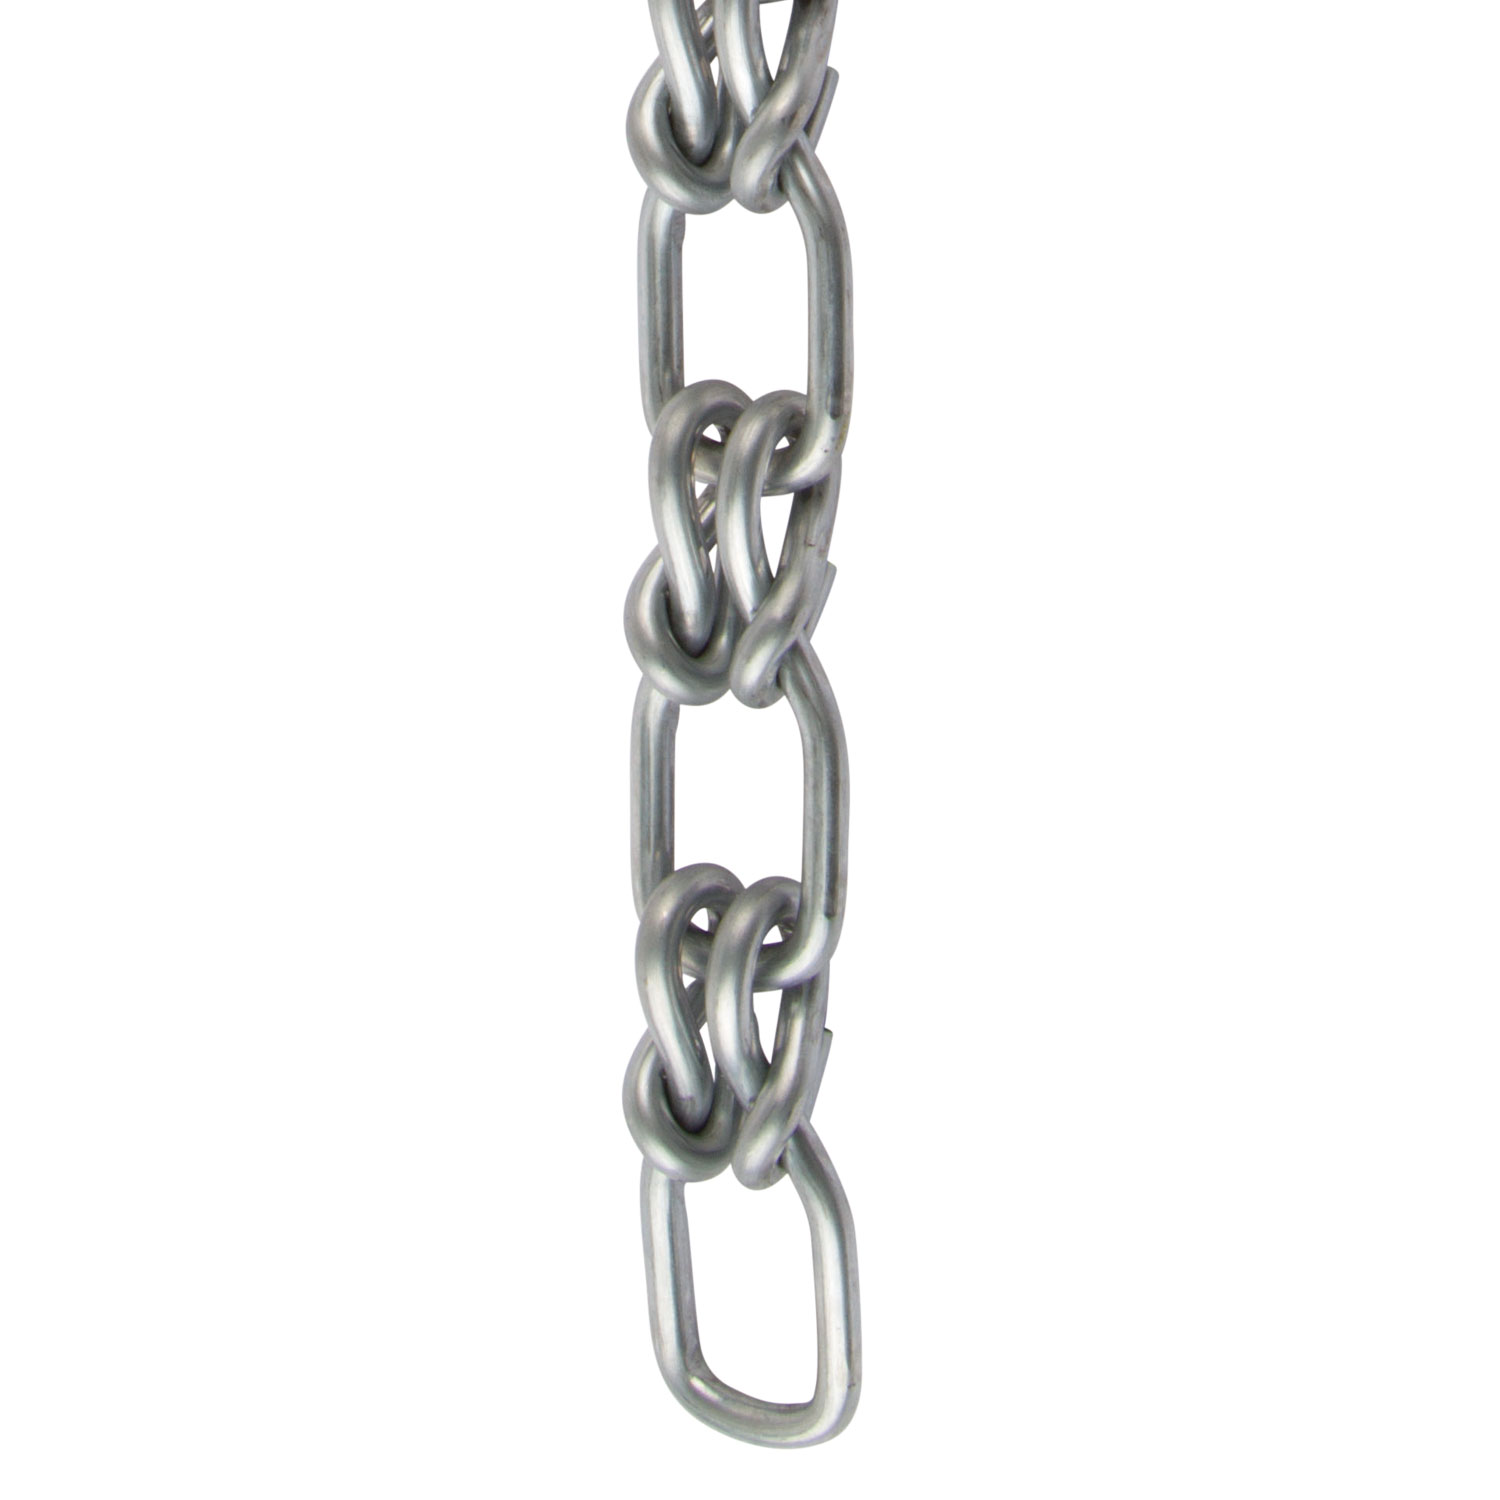 Perfection Chain Products 30003 #18 Single Jack Chain 25 FT Bag Bright Galvanized Renewed 